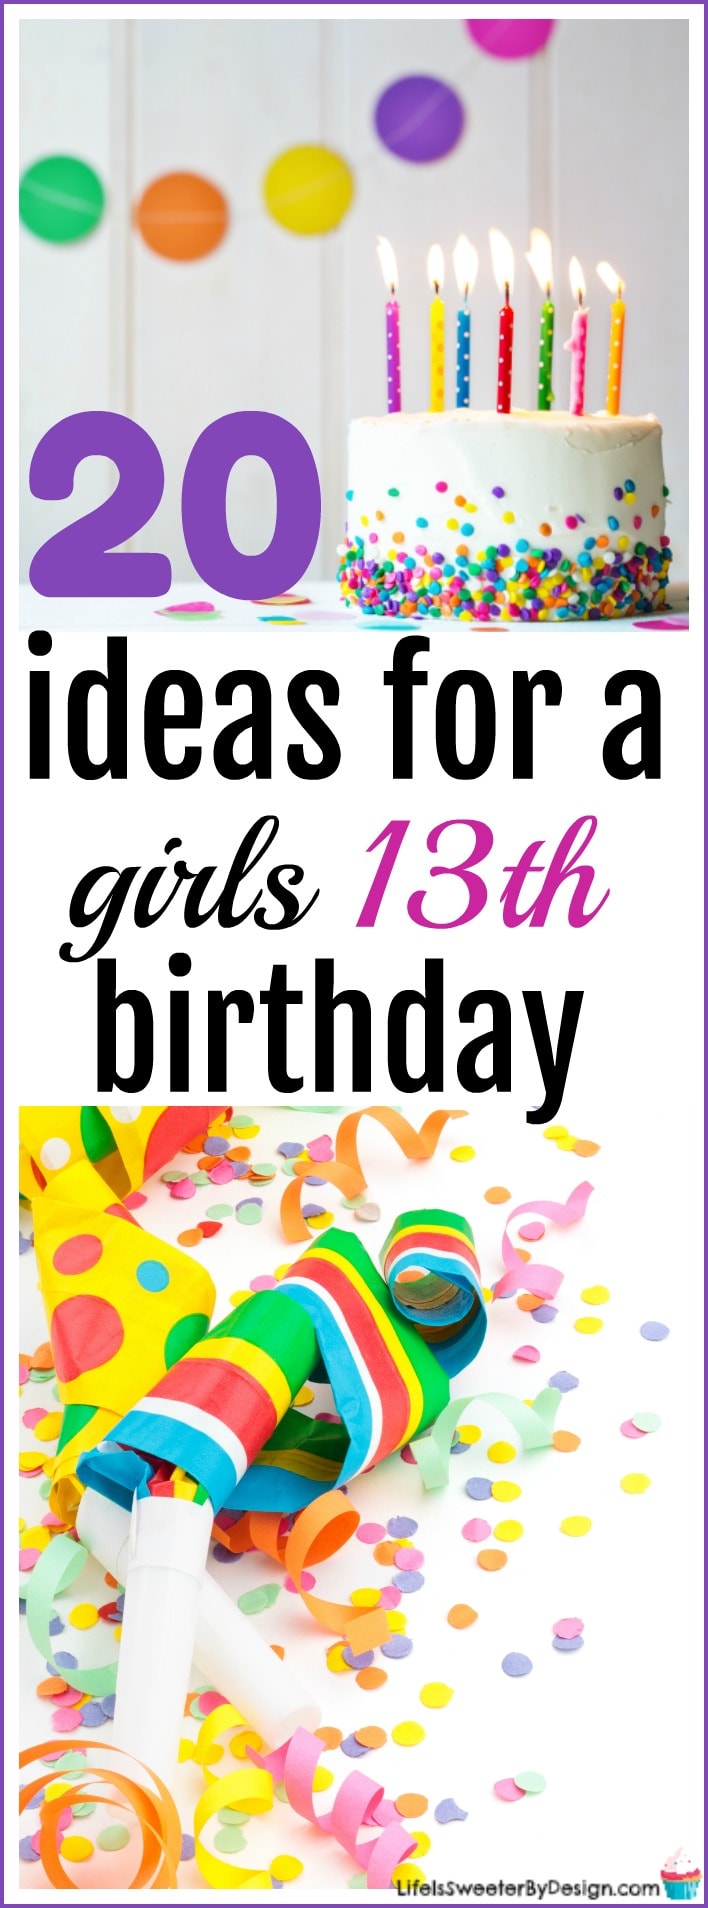 20 Ideas for a Girls 13th Birthday - Life is Sweeter By Design